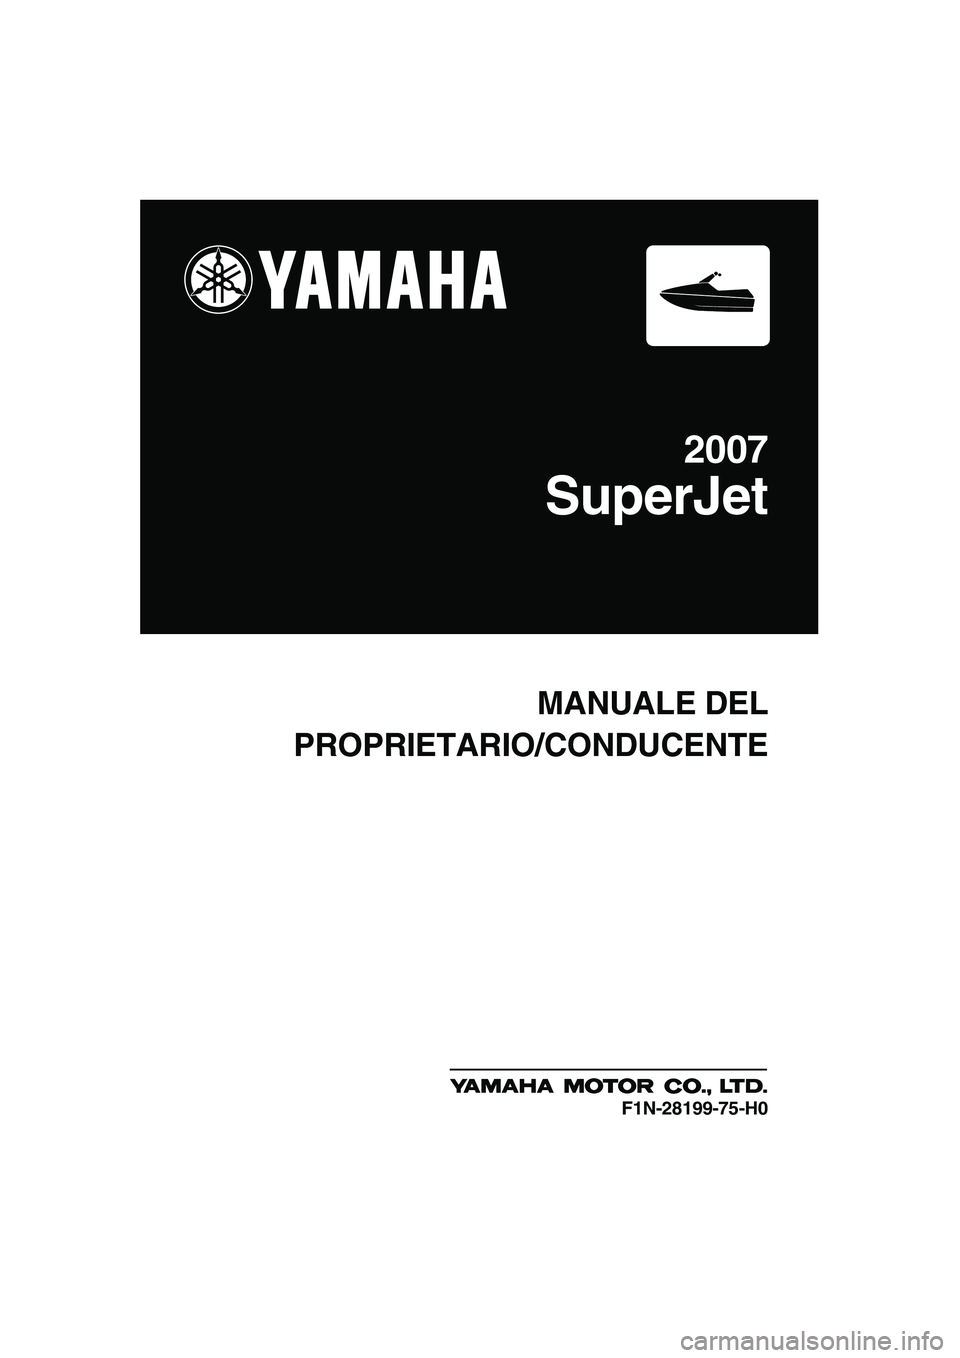 YAMAHA SUPERJET 2007  Manuale duso (in Italian) MANUALE DEL
PROPRIETARIO/CONDUCENTE
2007
SuperJet
F1N-28199-75-H0
UF1N75H0.book  Page 1  Tuesday, May 16, 2006  1:26 PM 